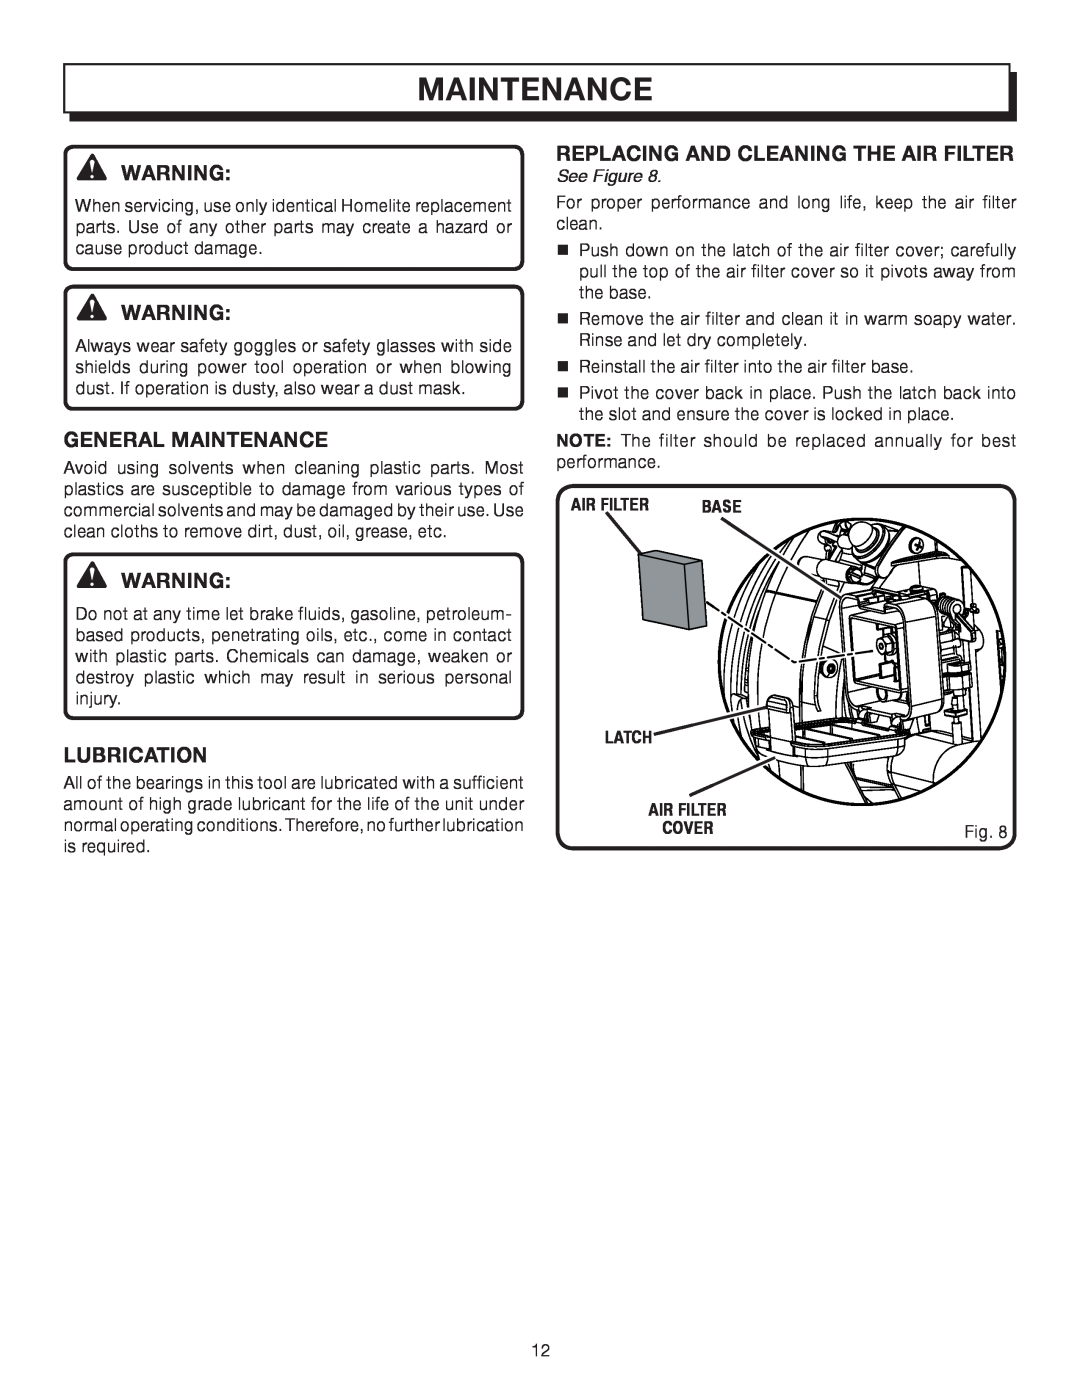 Homelite UT08512A manual Maintenance, Replacing And Cleaning The Air Filter, See Figure, Latch 